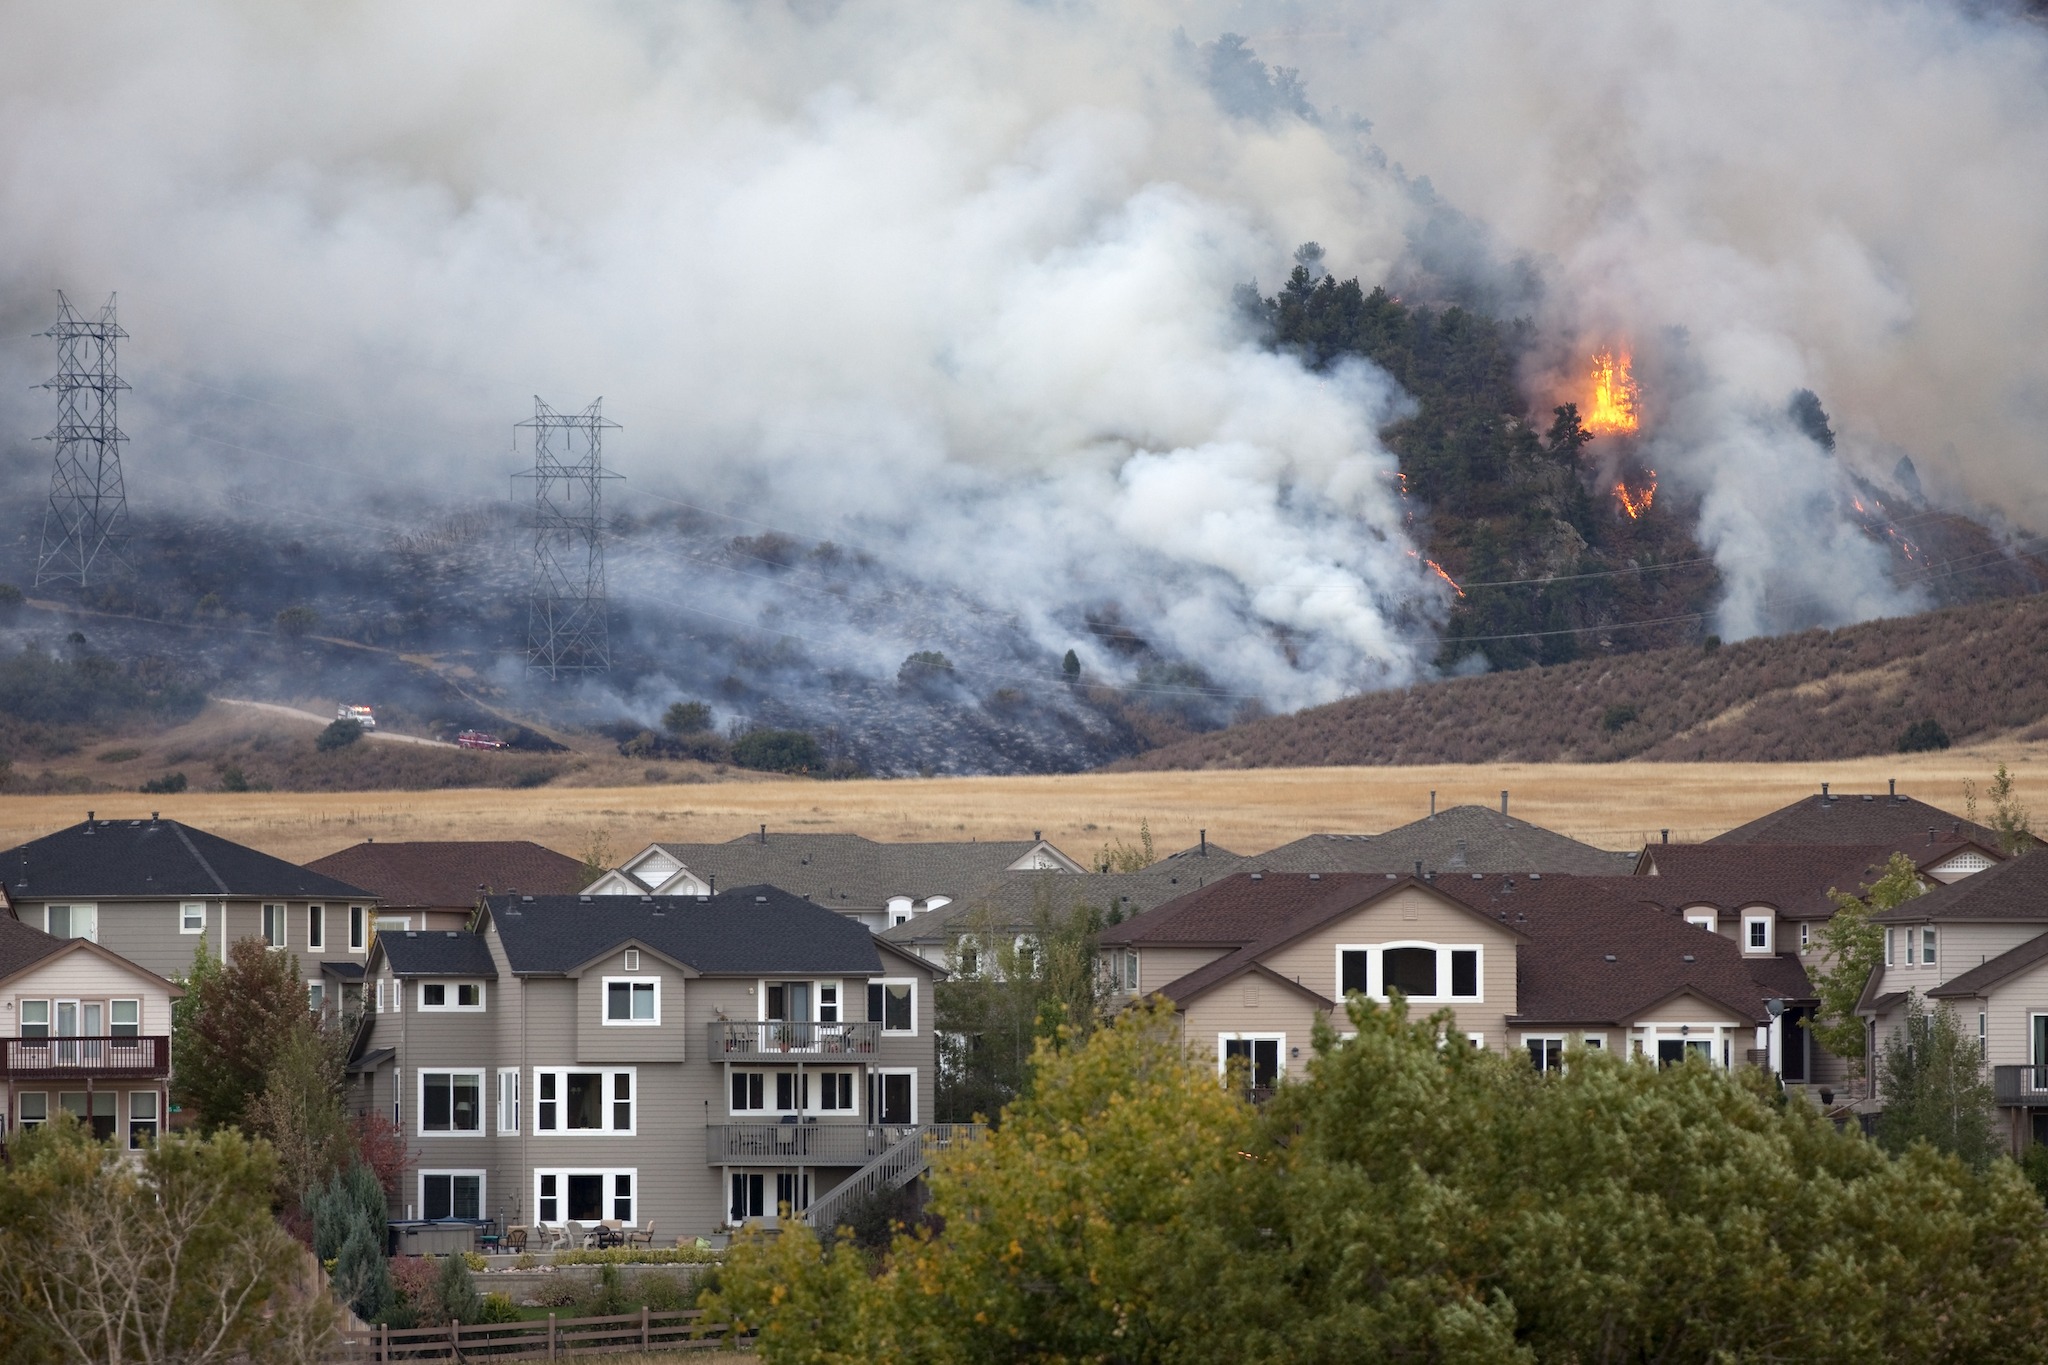 Missing the mark: Effectiveness and funding in community wildfire risk reduction